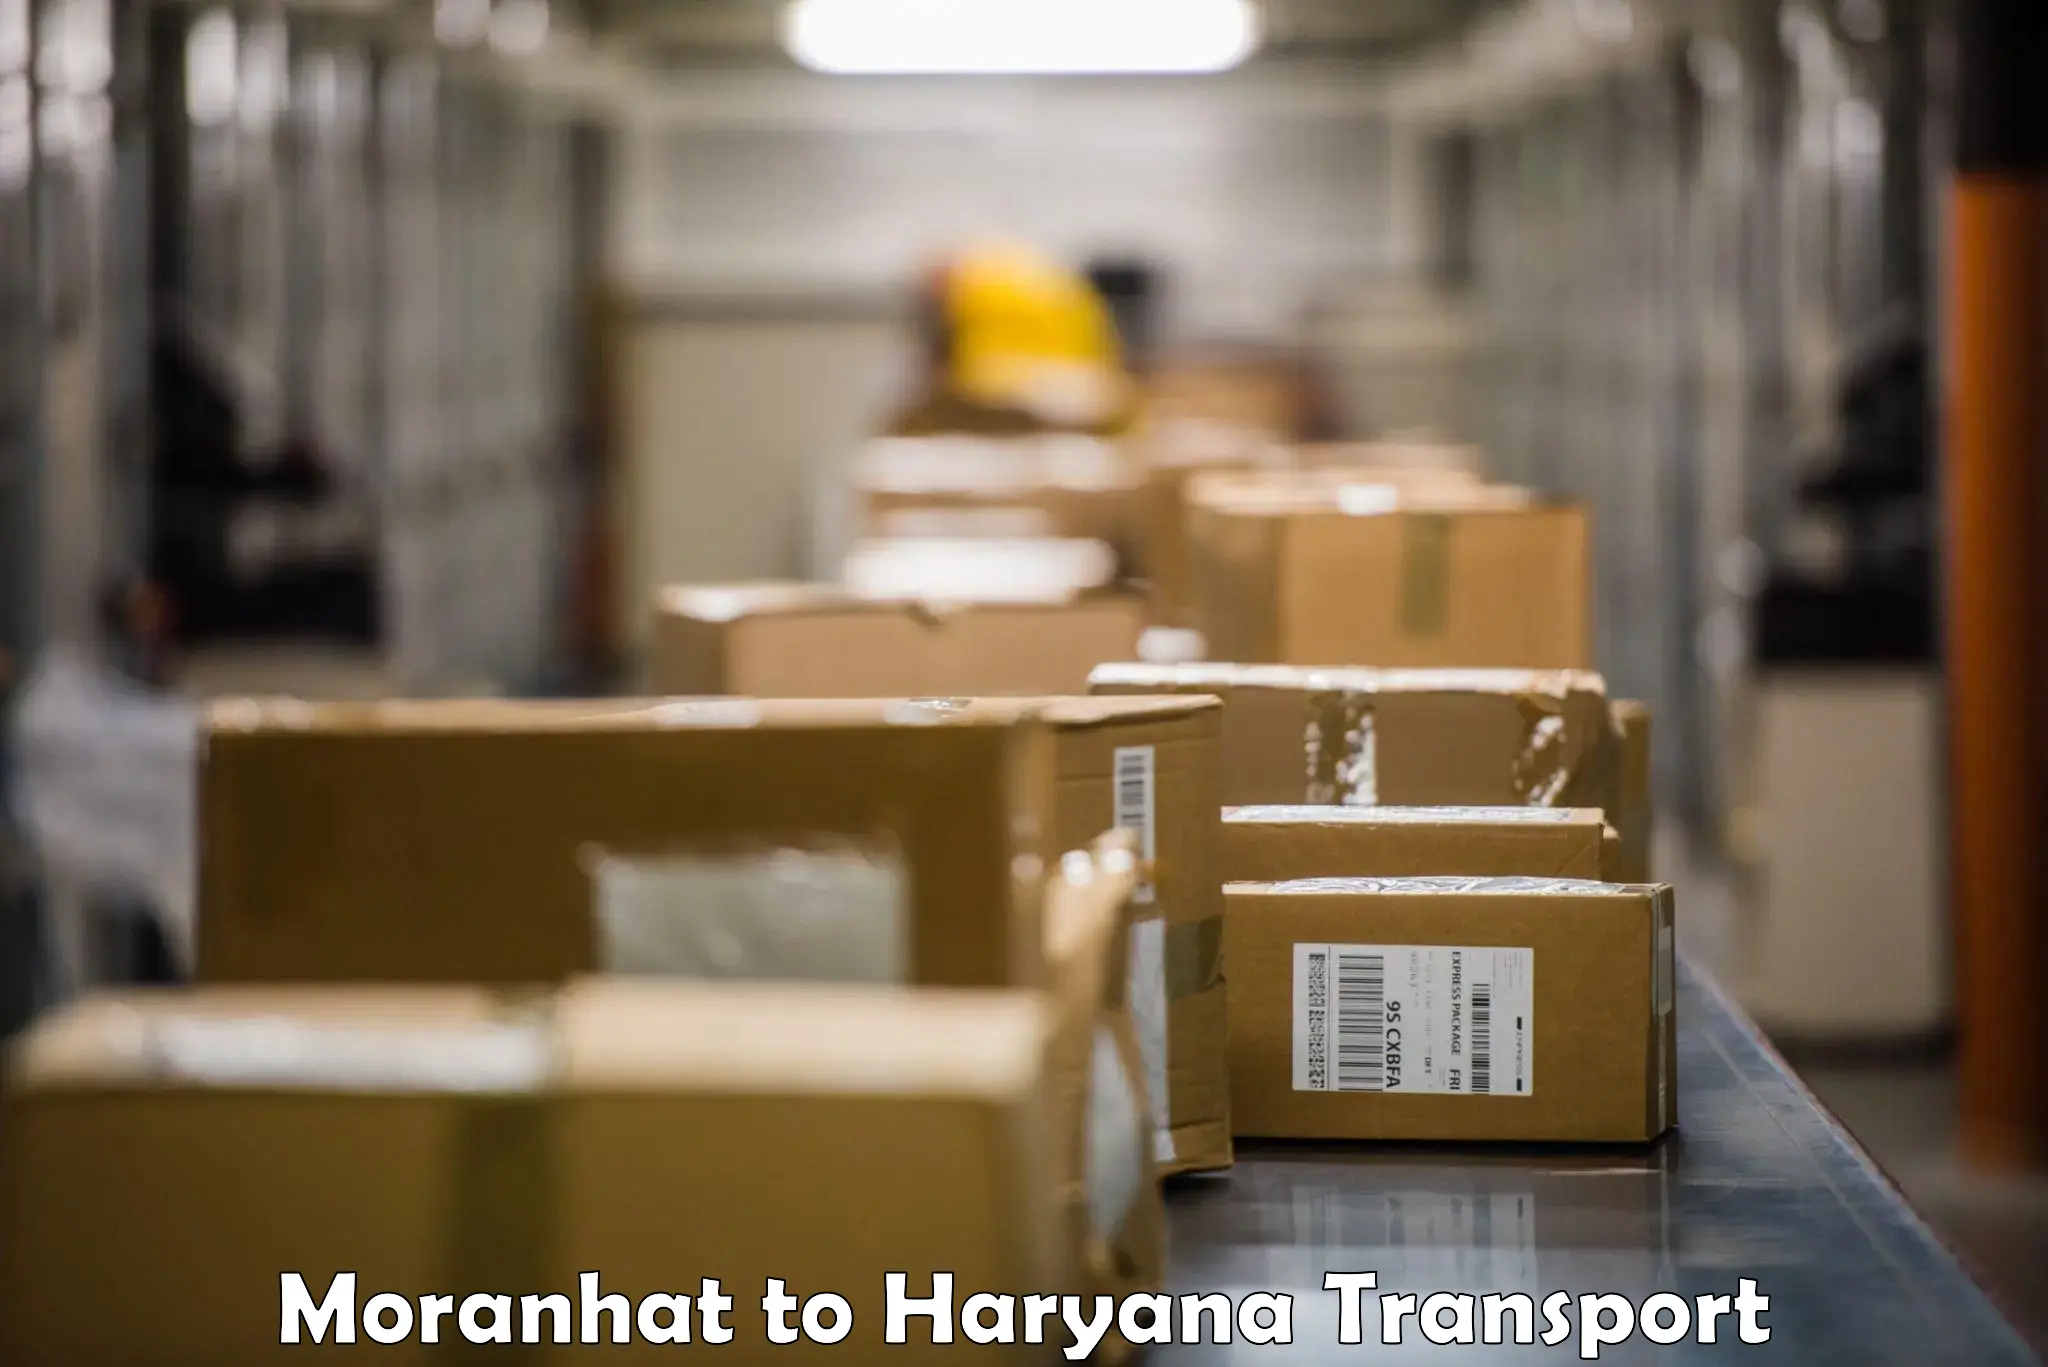 Truck transport companies in India Moranhat to Hodal